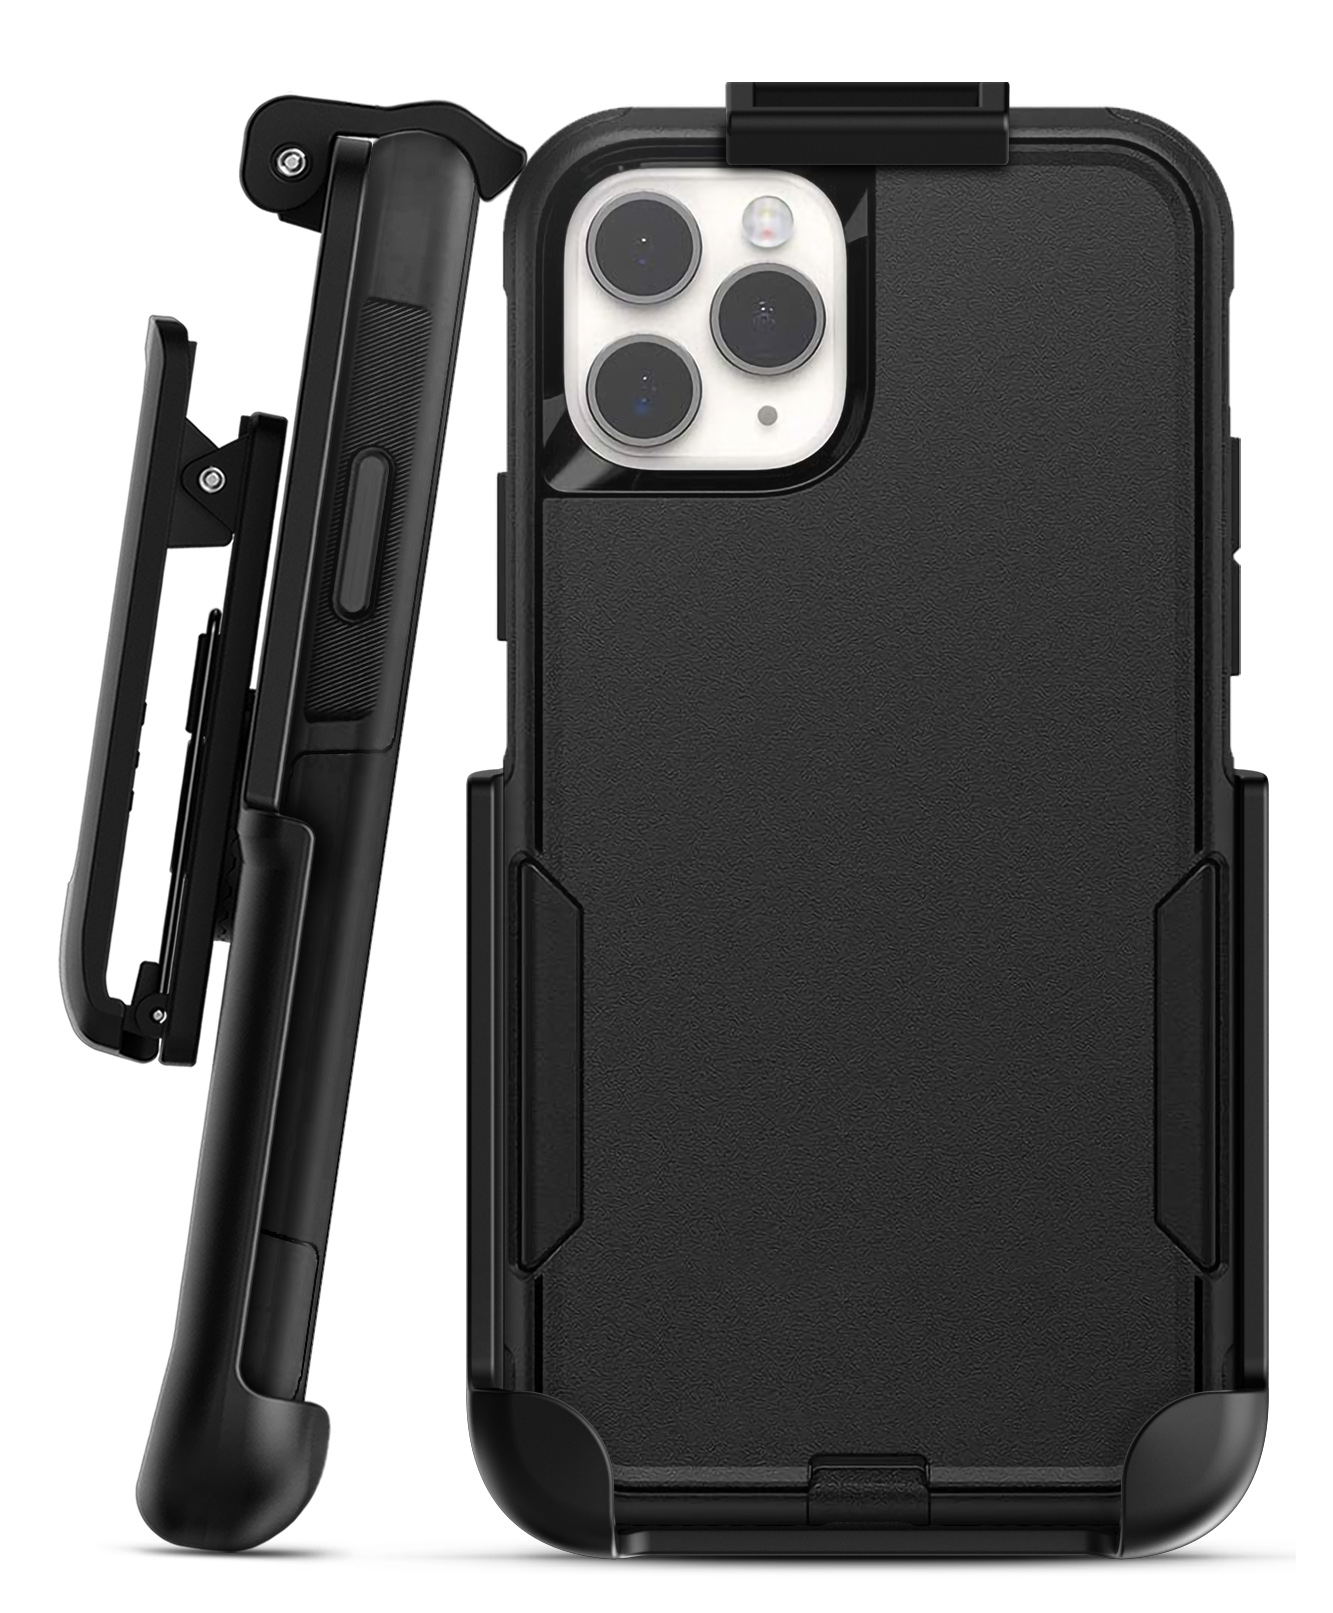 iPhone 11 Pro Max Otterbox Commuter Holster - Encased